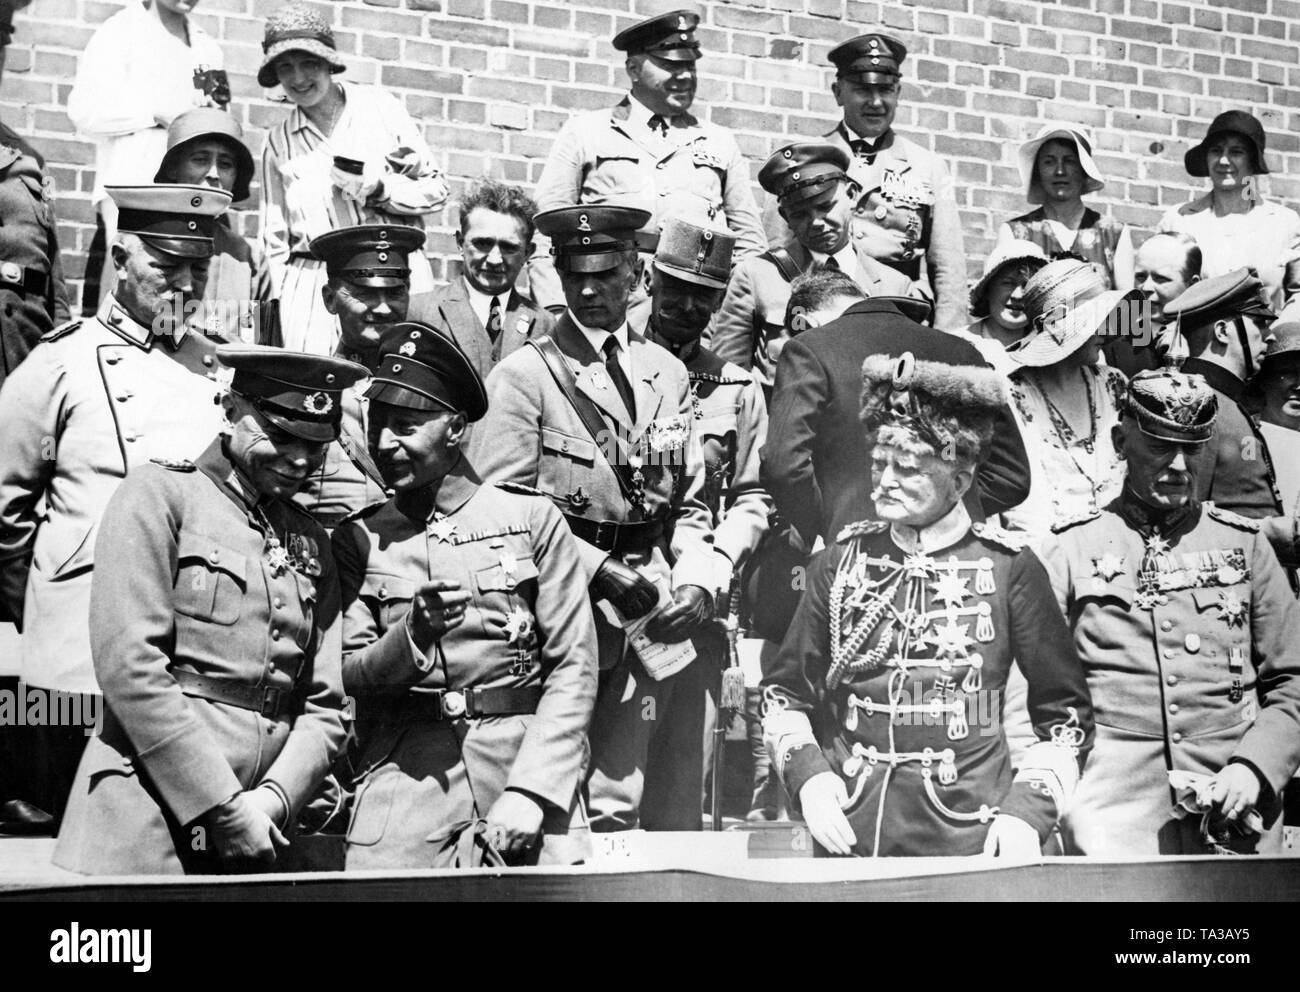 The VIP stand at the parade of the 'Stahlhelm' in 1931 in Wroclaw. From left: the former Chief of the Army General Colonel Hans von Seeckt, Crown Prince Wilhelm of Prussia, Field Marshal August von Mackensen and General von Hutier, the President of the Deutscher Offizier Bund. Stock Photo